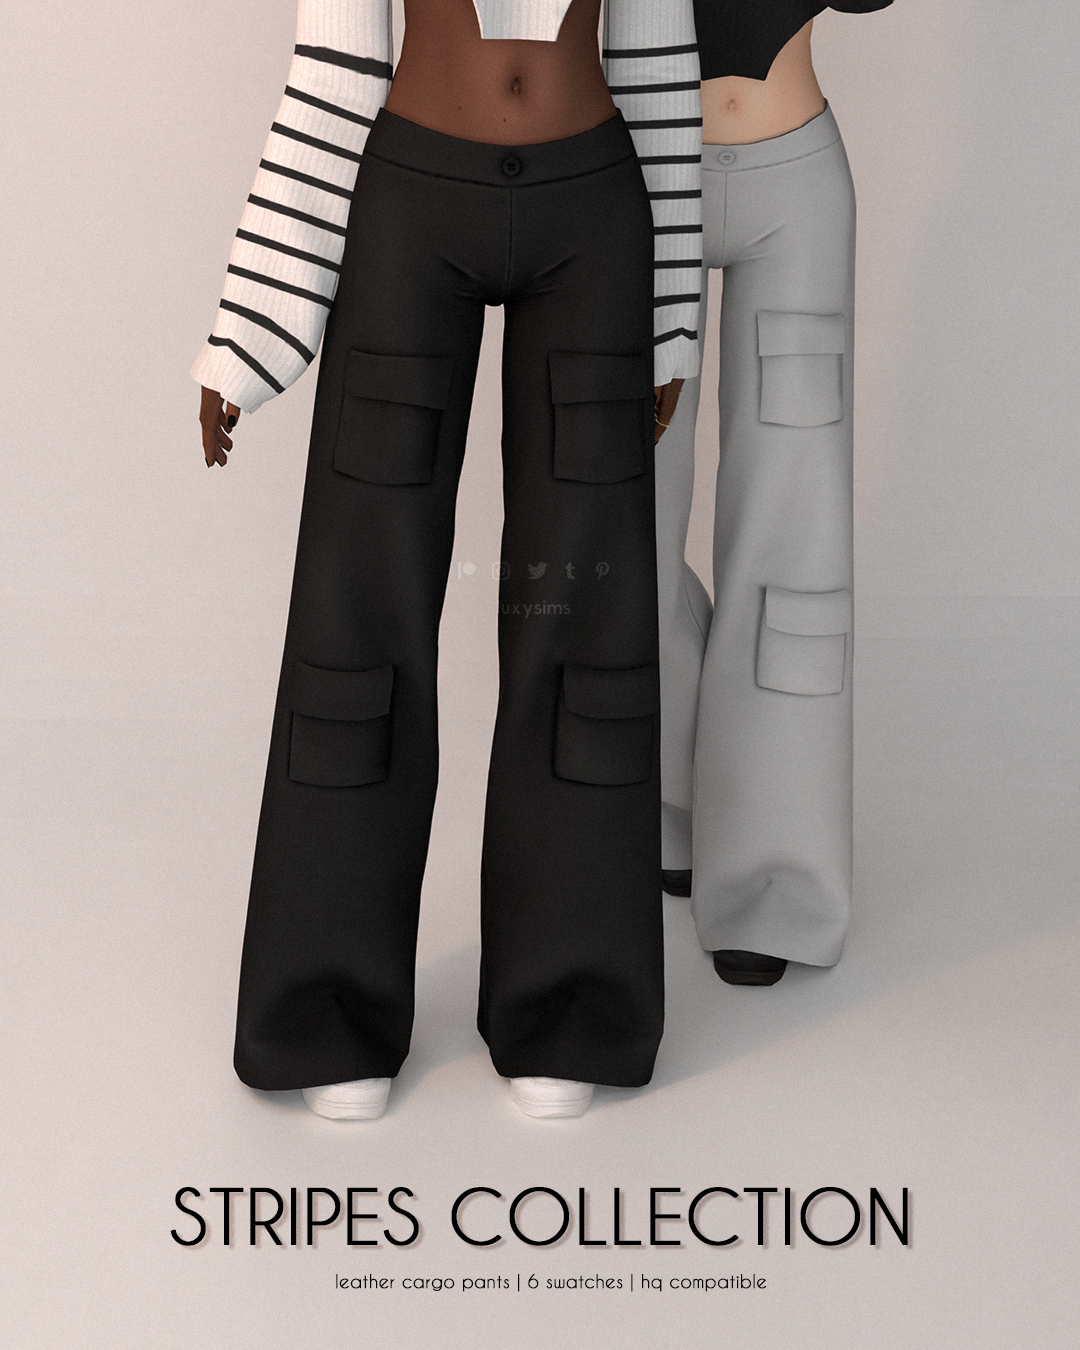 Leather Cargo Pants - Stripes Collection - The Sims 4 Create a Sim ...